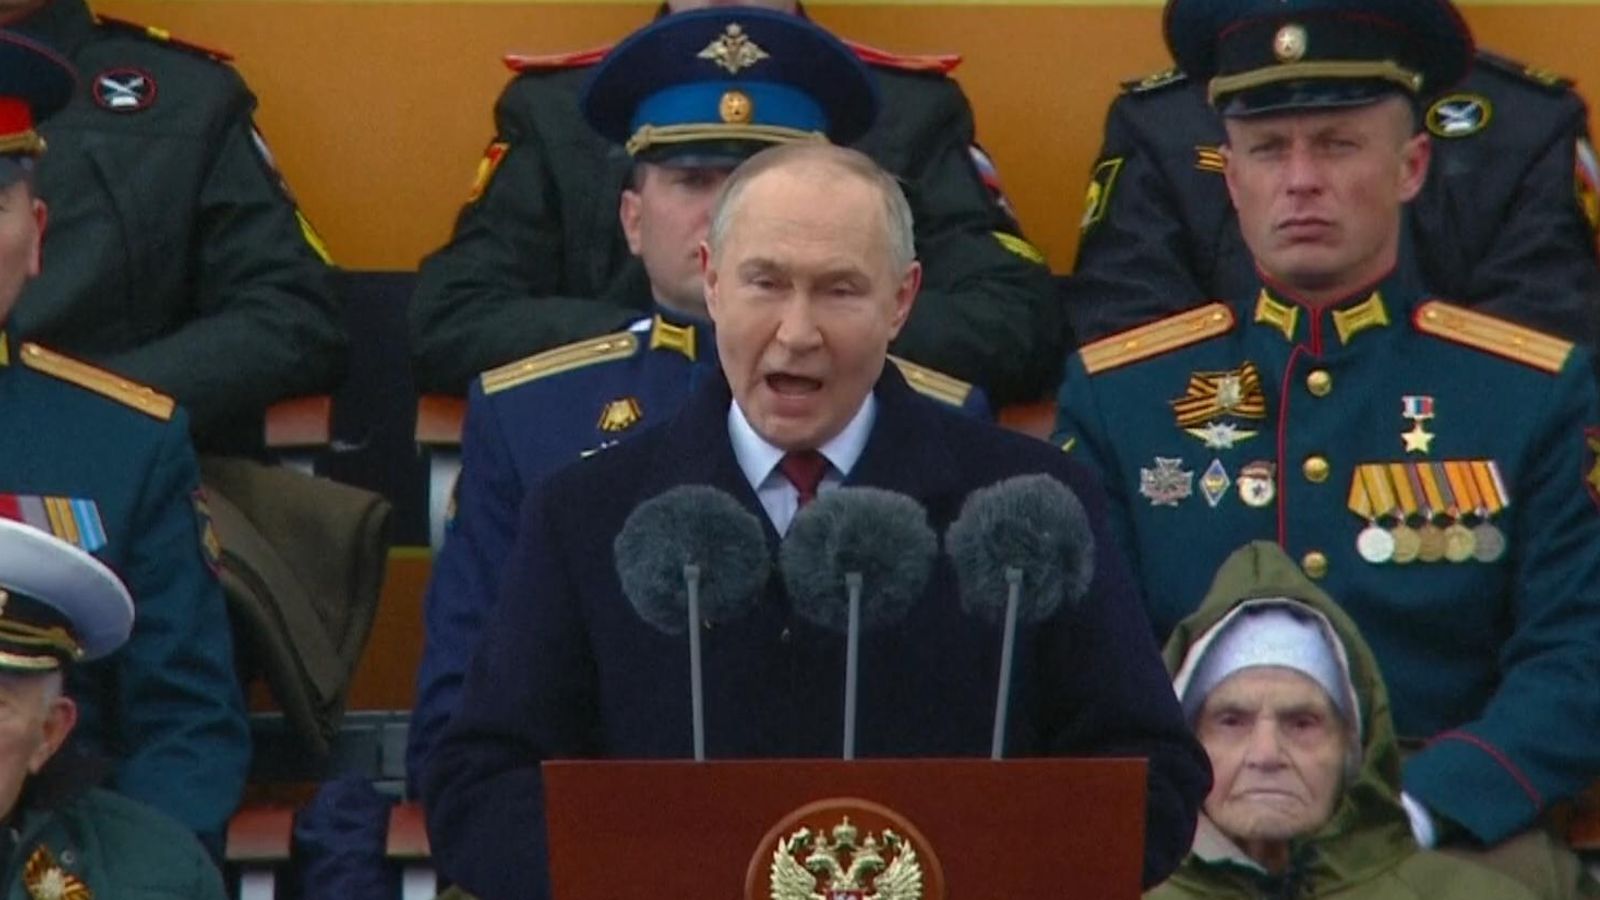 only one tank on display as vladimir putin says country is going through 'difficult period'